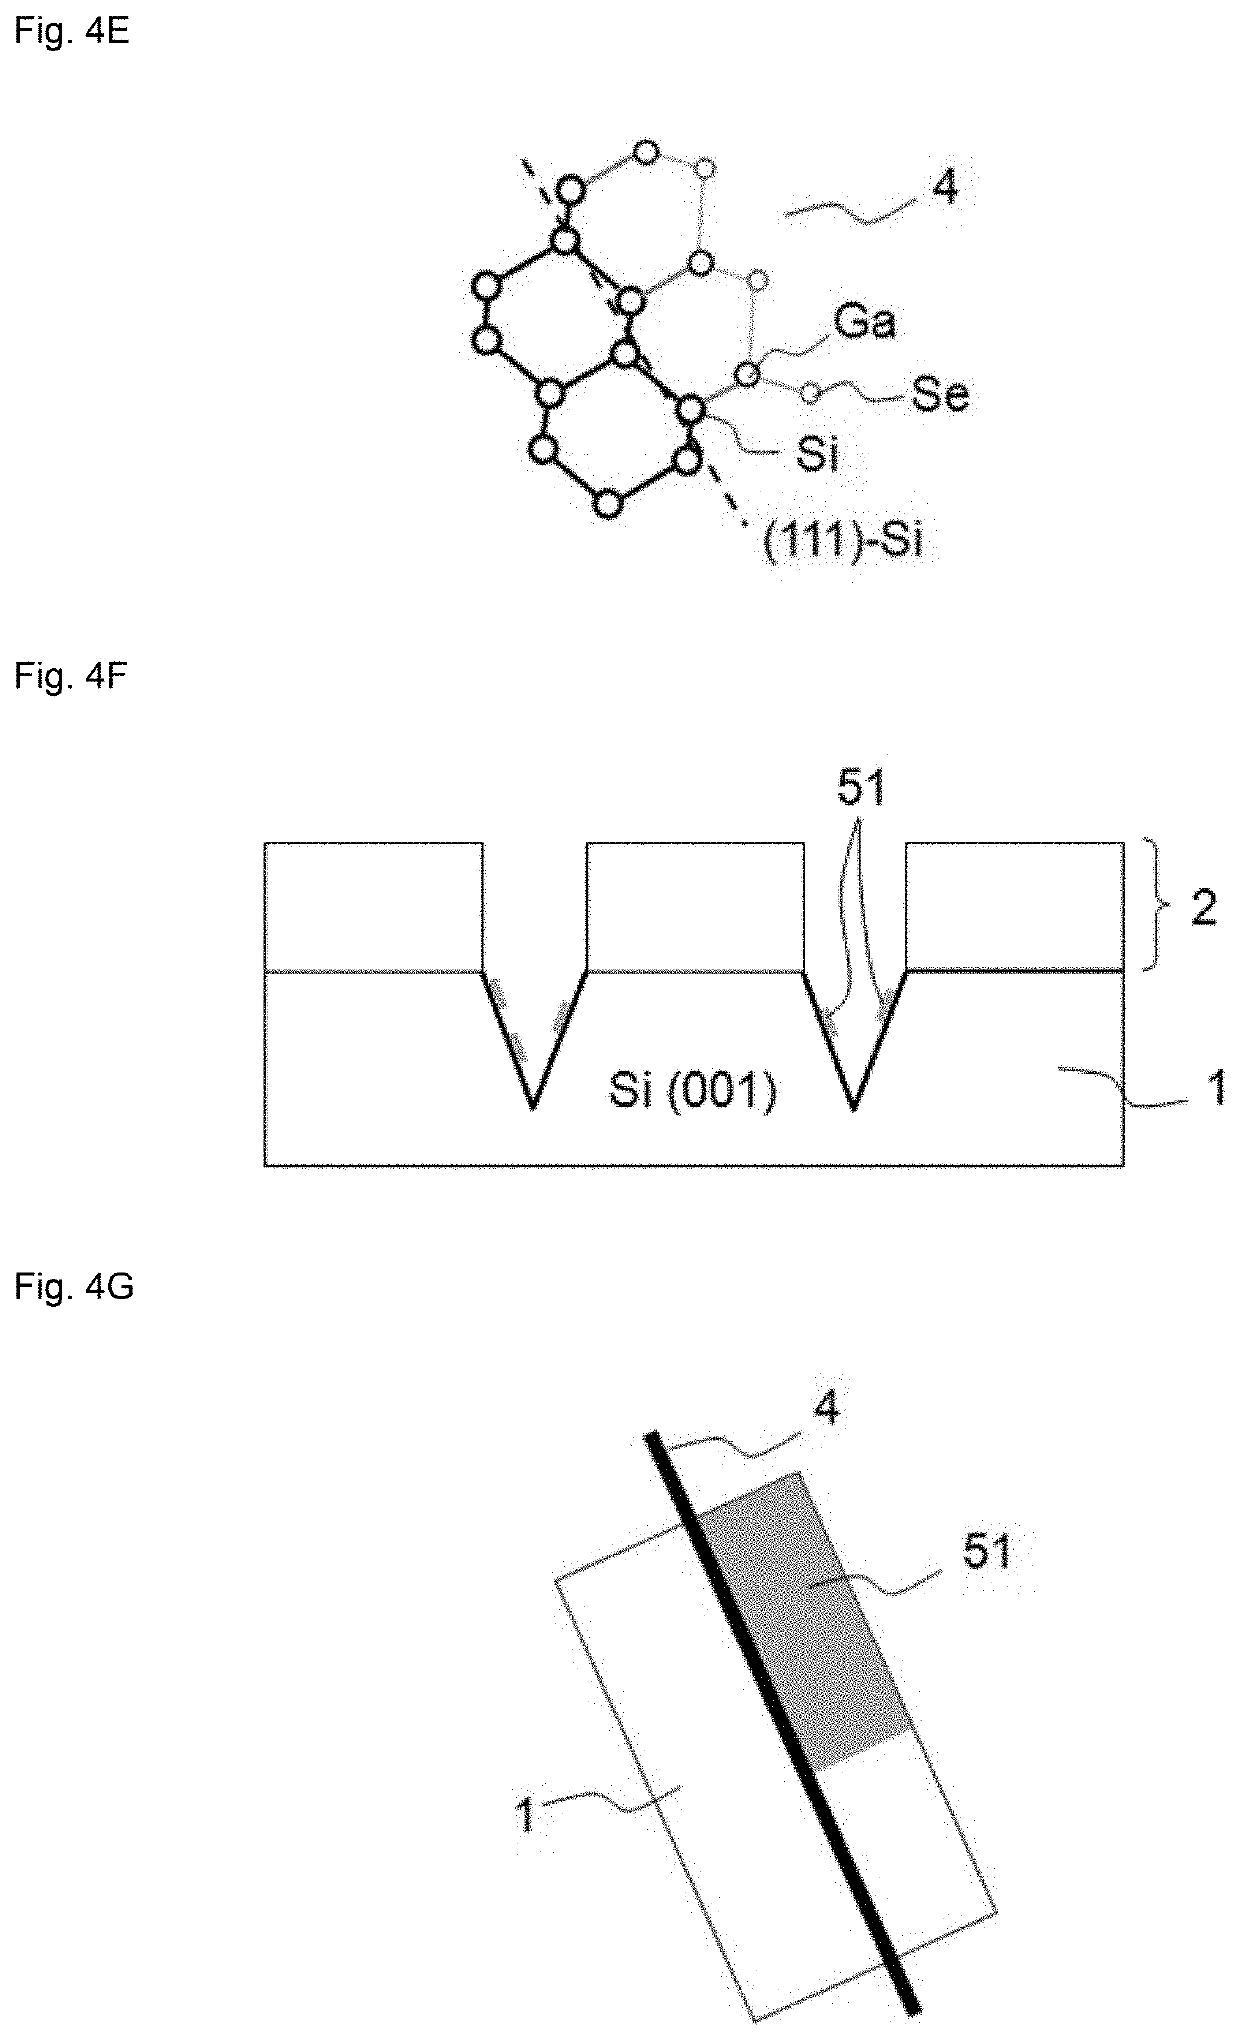 Process for the hetero-integration of a semiconductor material of interest on a silicon substrate